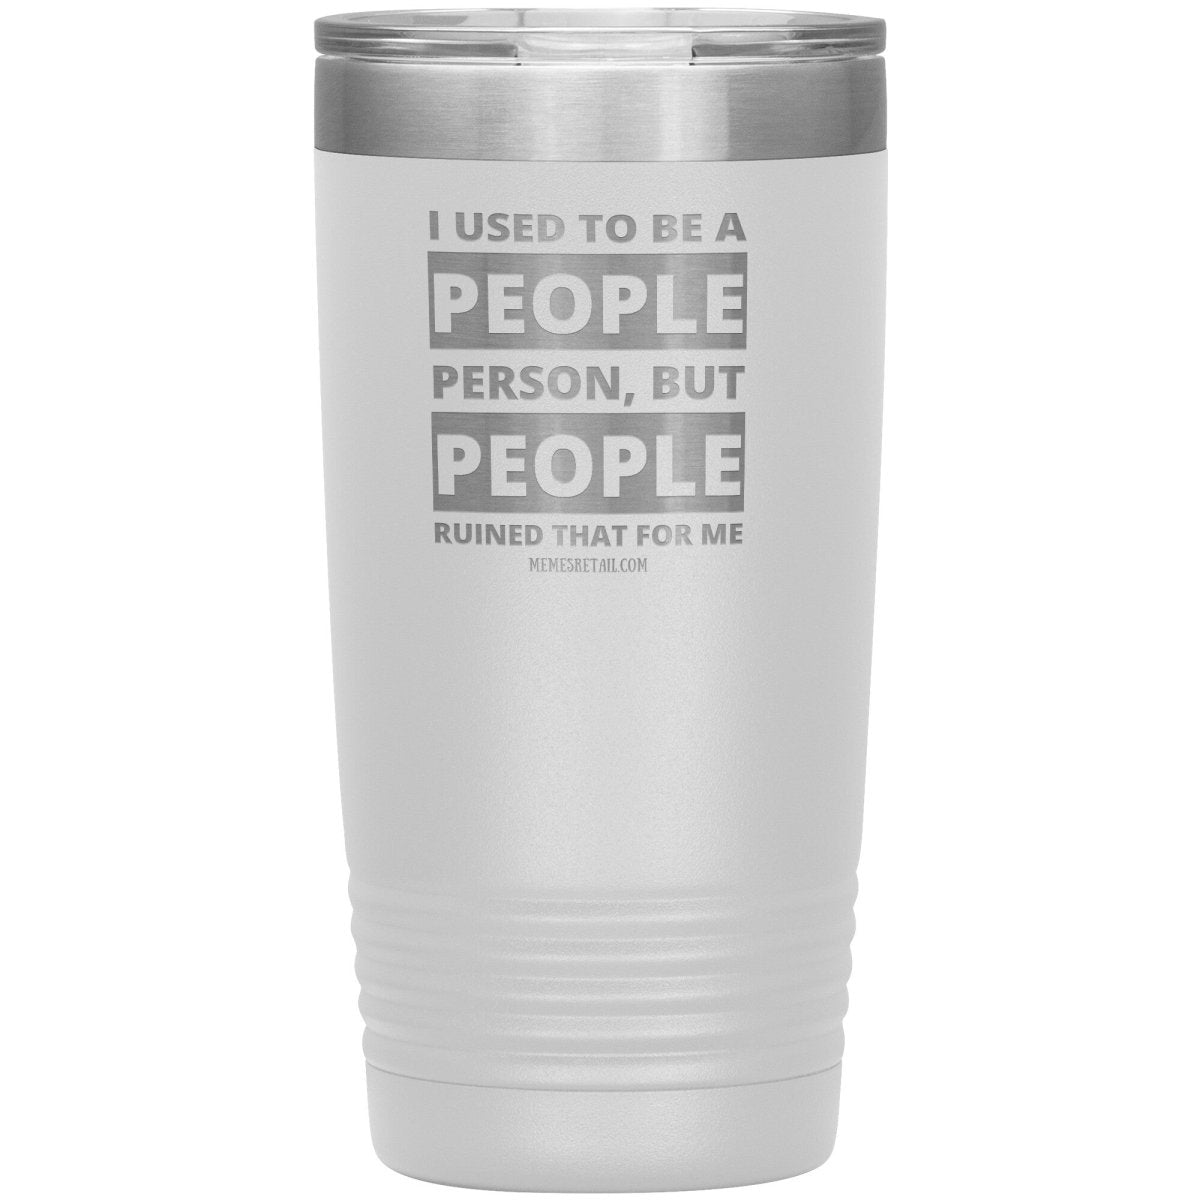 I Used To Be A People Person, But People Ruined That For Me Tumblers, 20oz Insulated Tumbler / White - MemesRetail.com